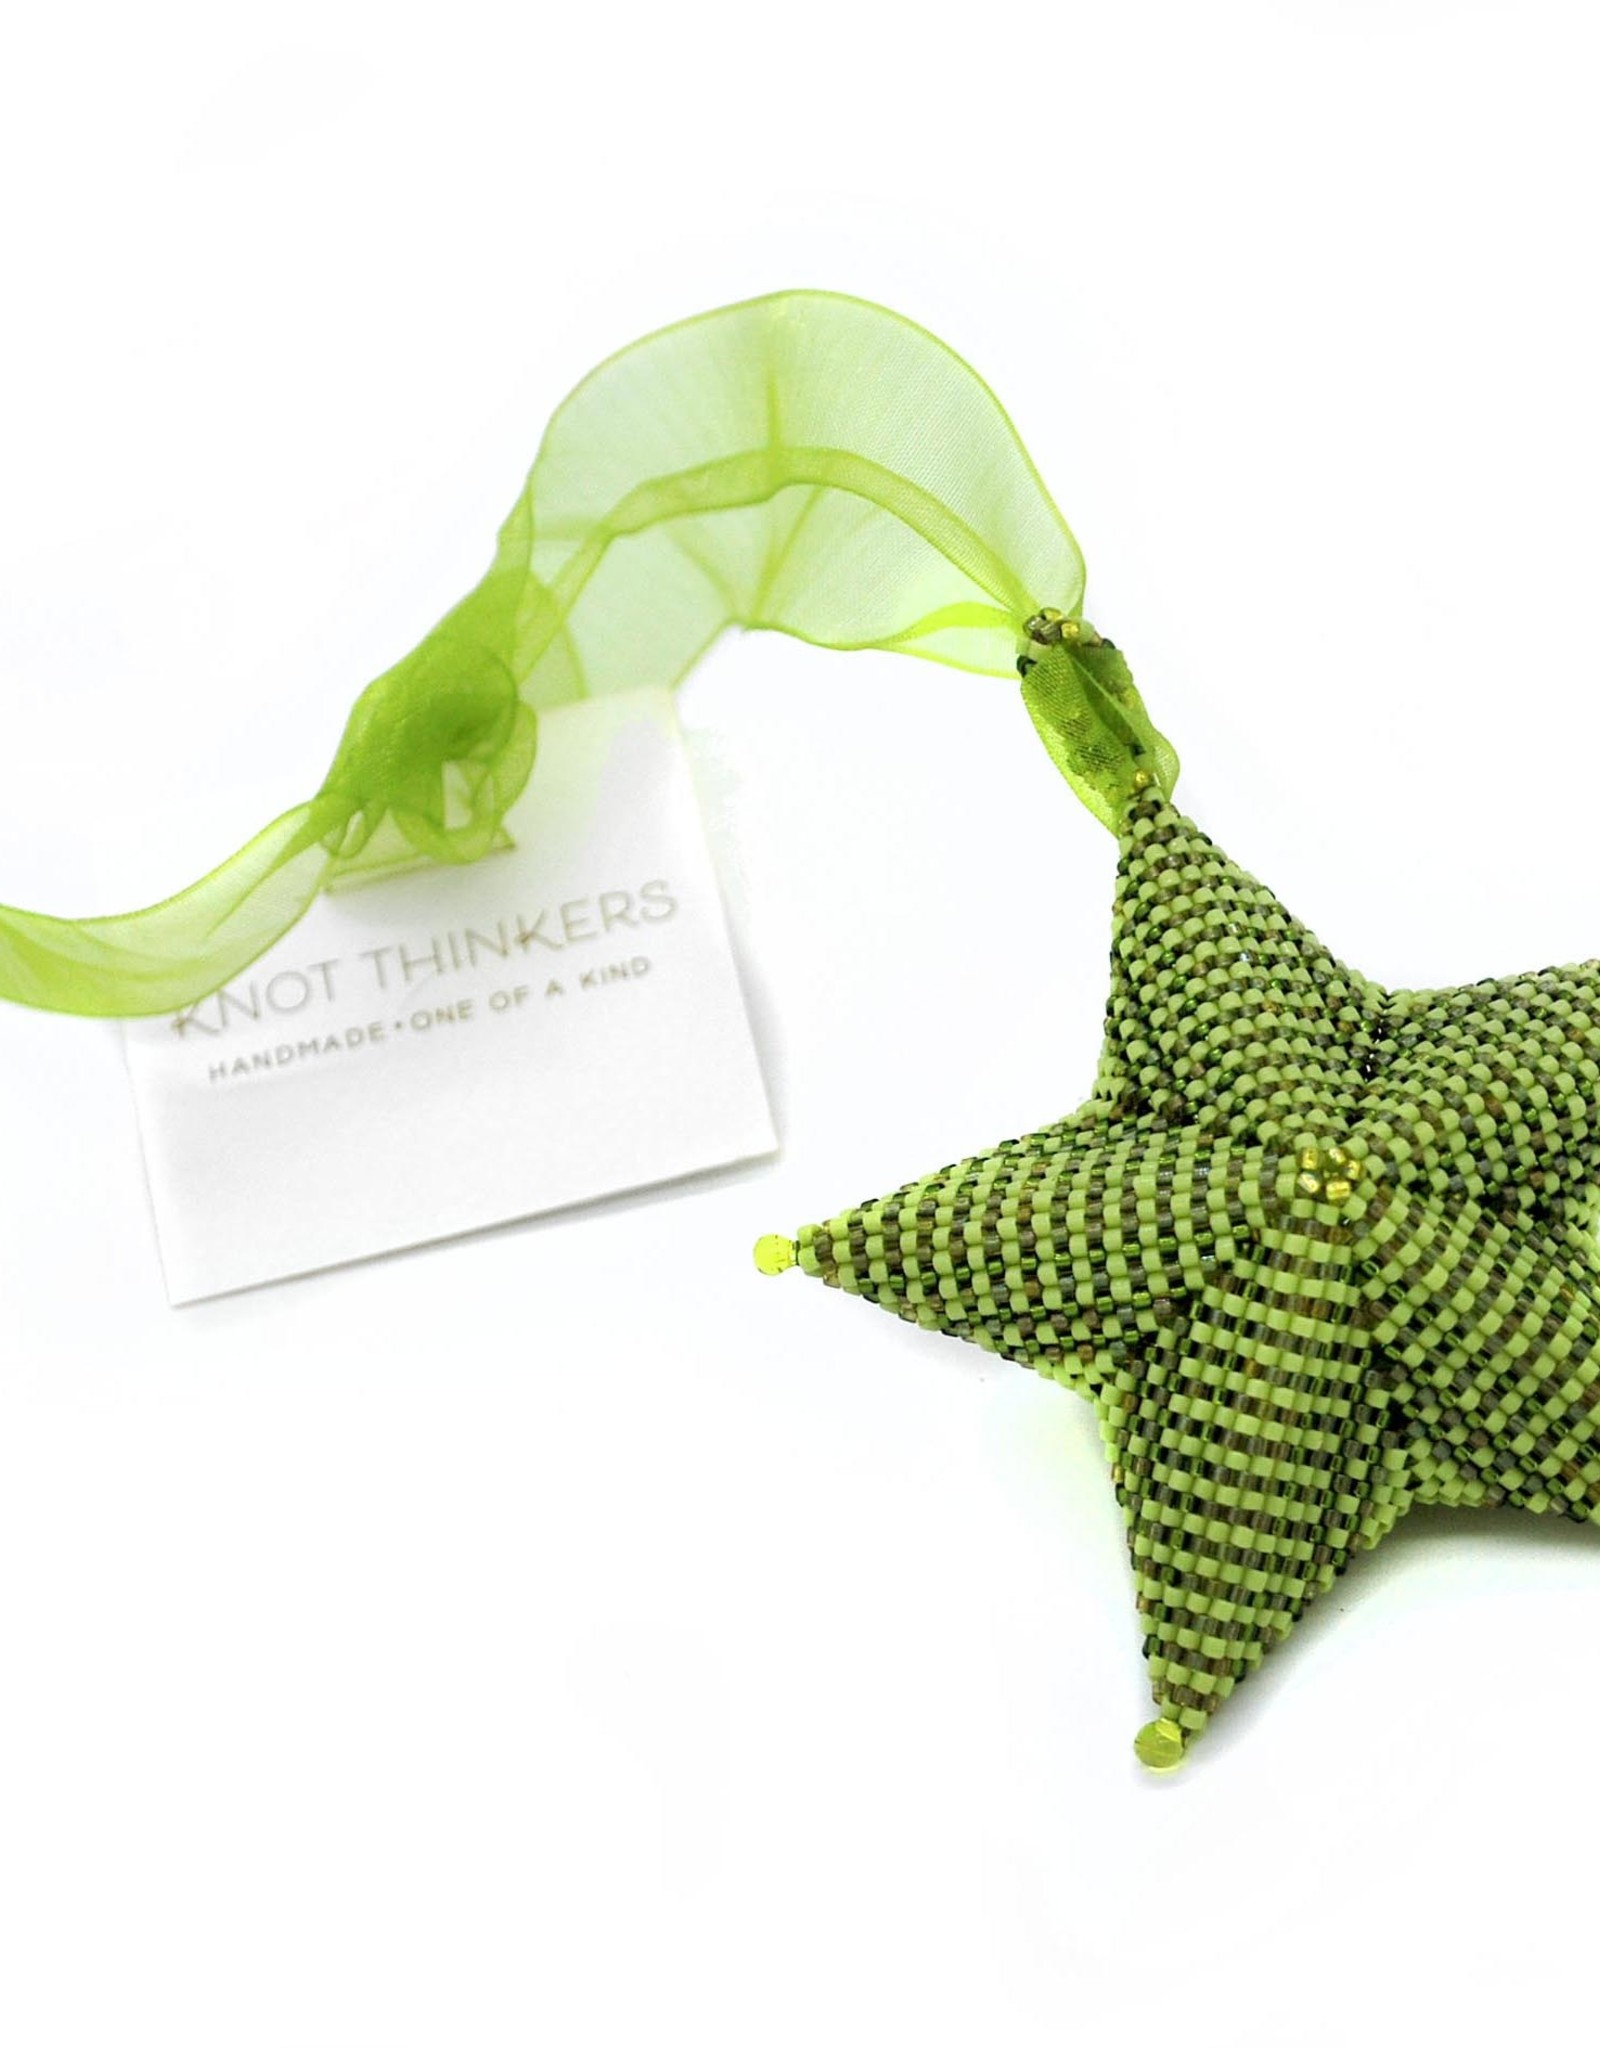 Knot Thinkers “Star Ornament” (green) by Knot Thinkers